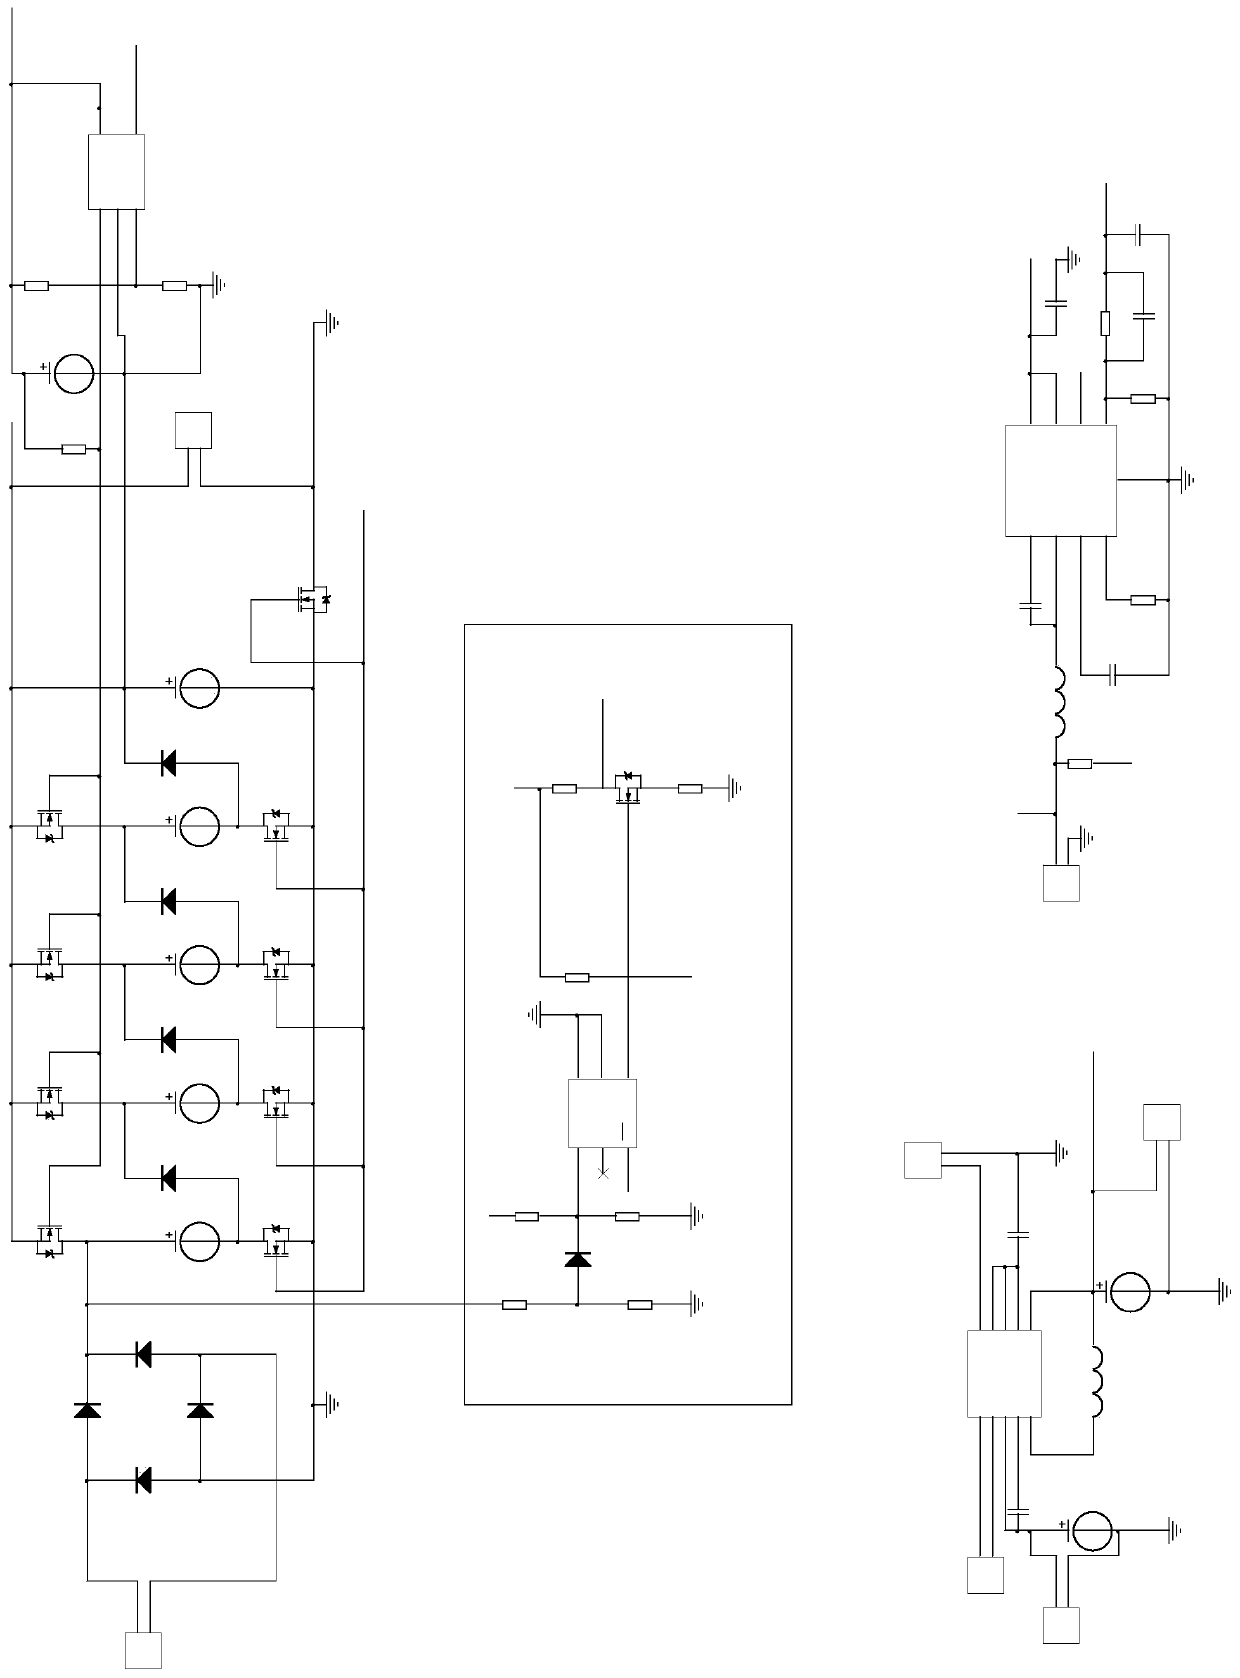 Power supply management circuit with automatic on-off switched capacitor network